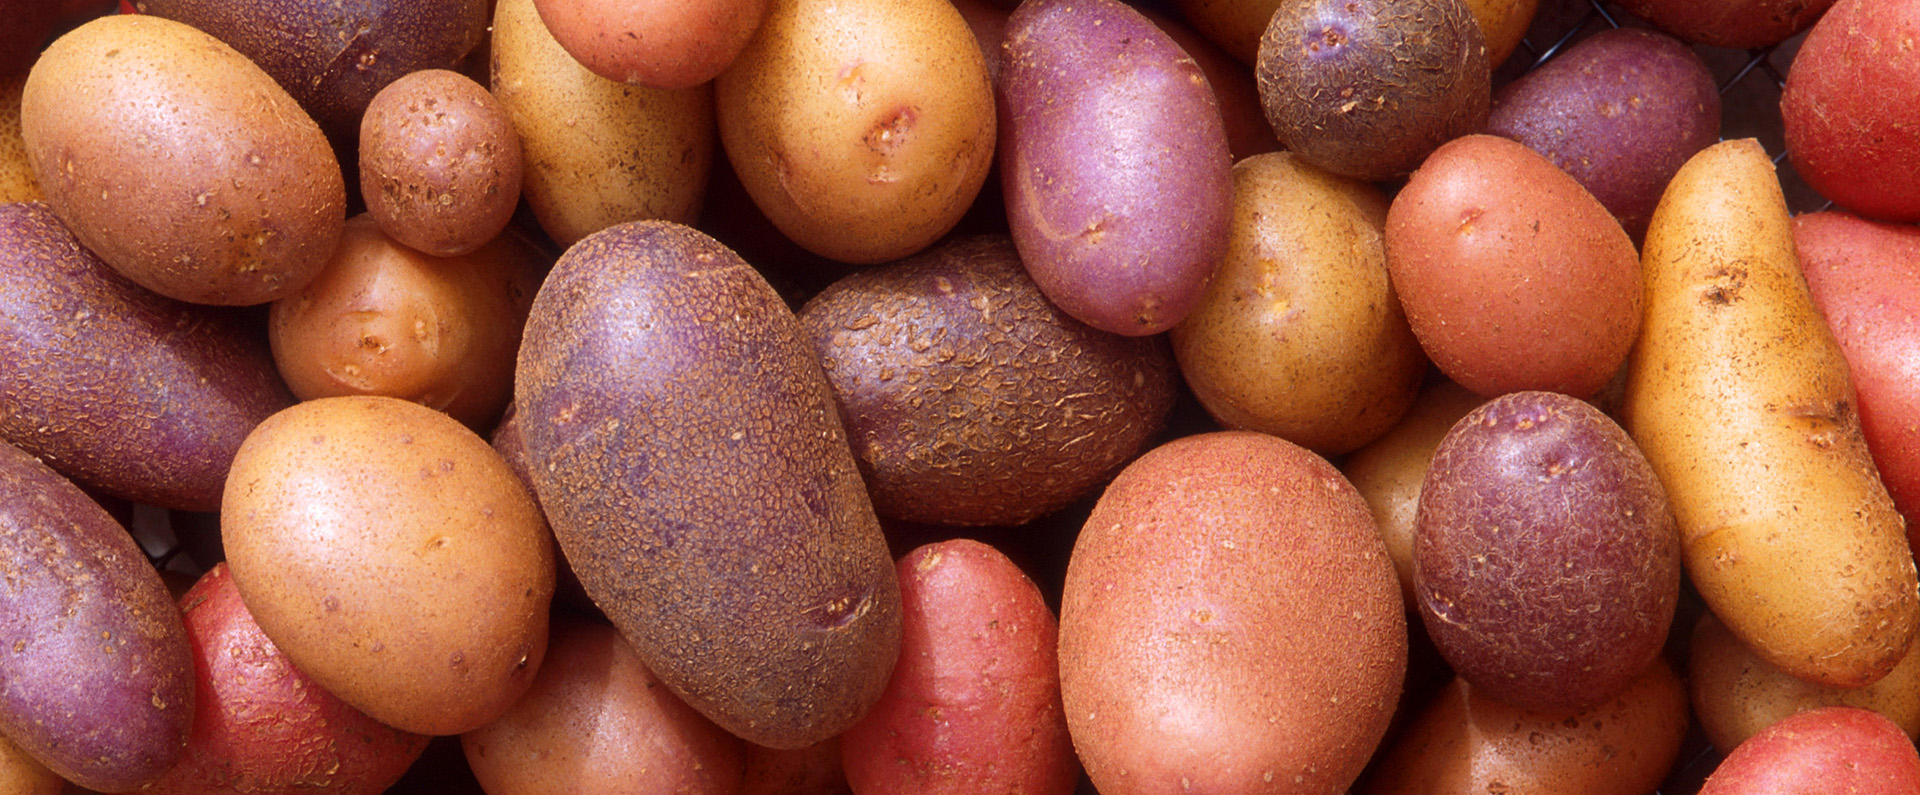 A group of purple, red and yellow potatoes 